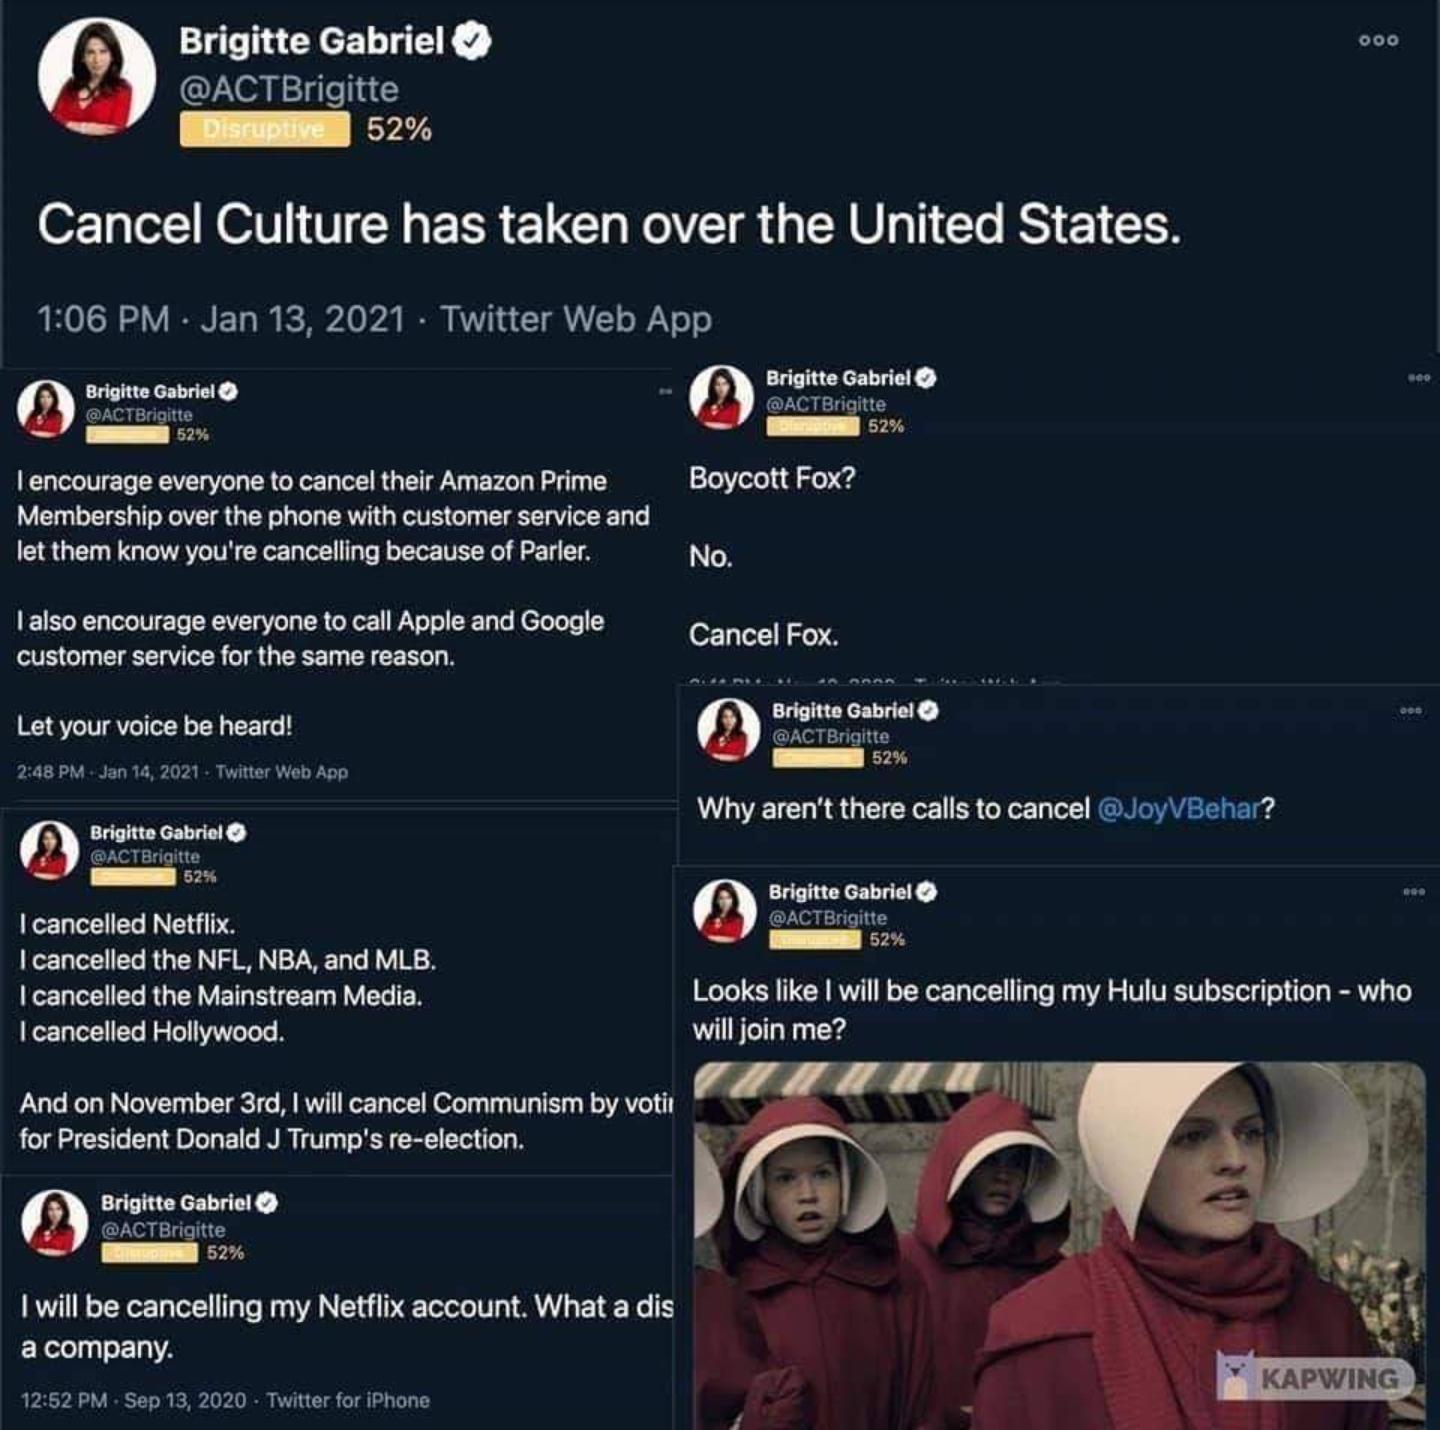 Cancel culture - Brigitte Gabriel Disrupuve 52% Cancel Culture has taken over the United States. Twitter Web App seo Brigitte Gabriel 52% Brigitte Gabriel 52% Boycott Fox? Tencourage everyone to cancel their Amazon Prime Membership over the phone with cus